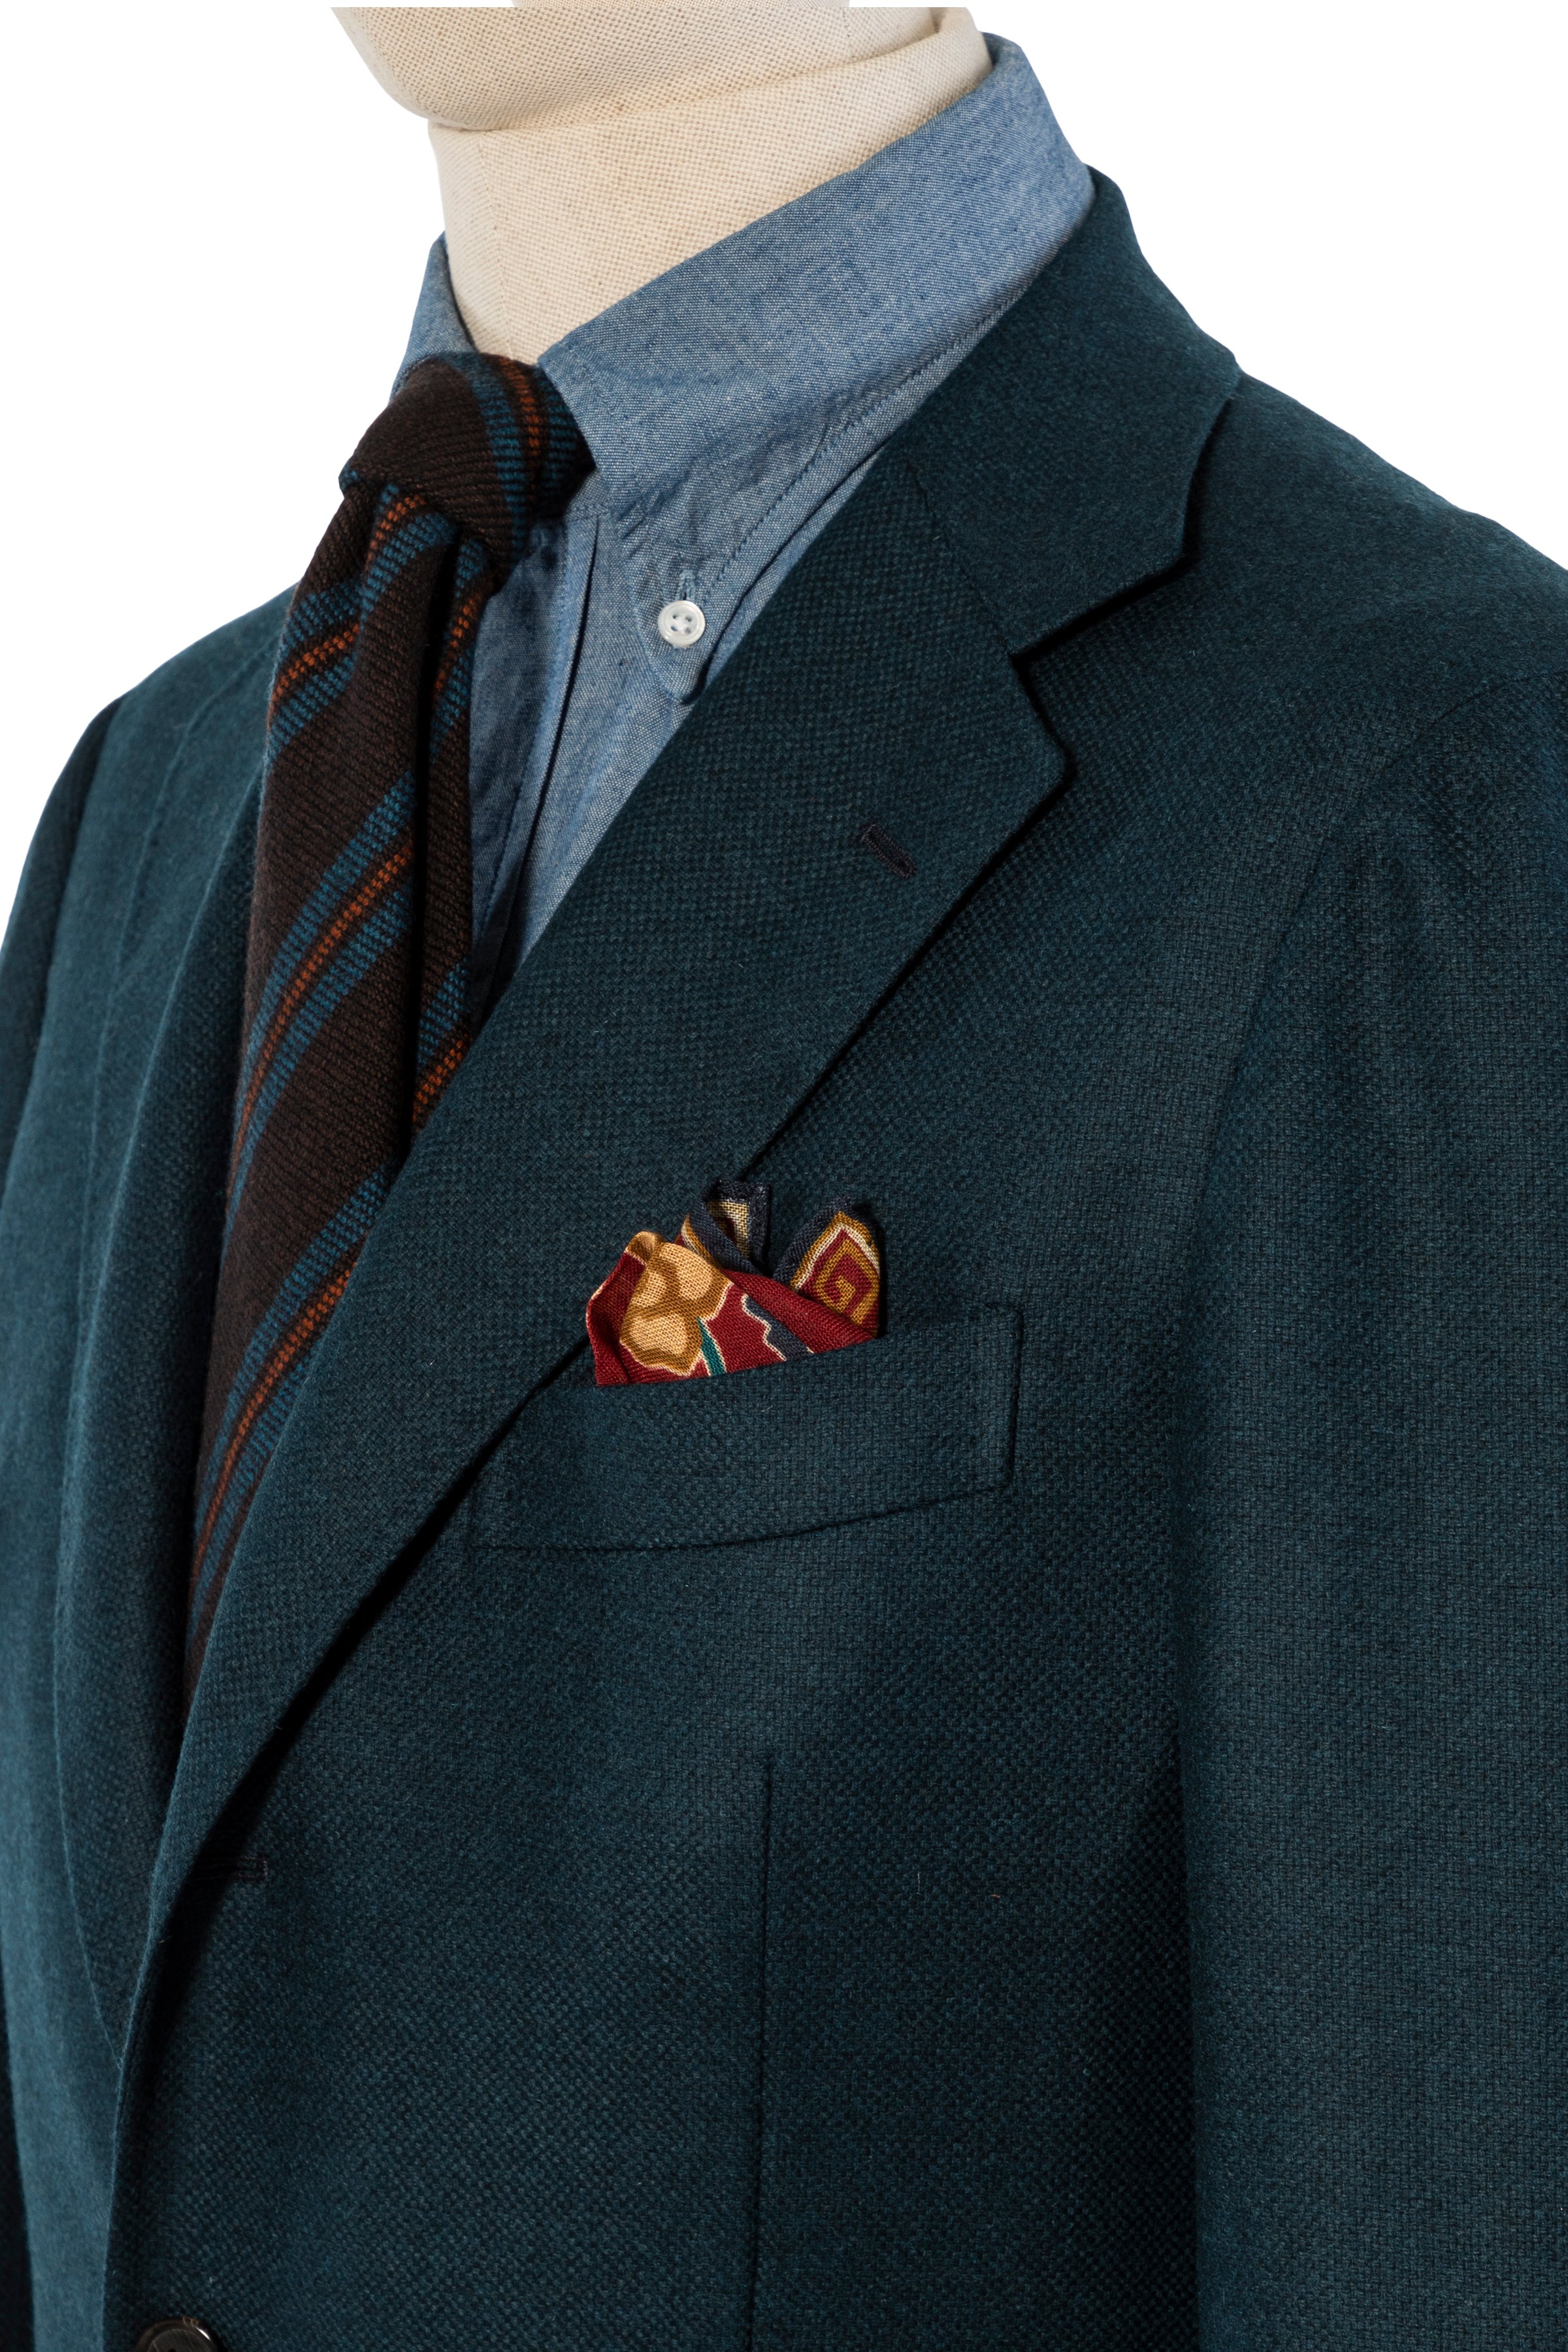 The Armoury by Ring Jacket Model 3 Blue Green Netherton H Wool Sport Coat